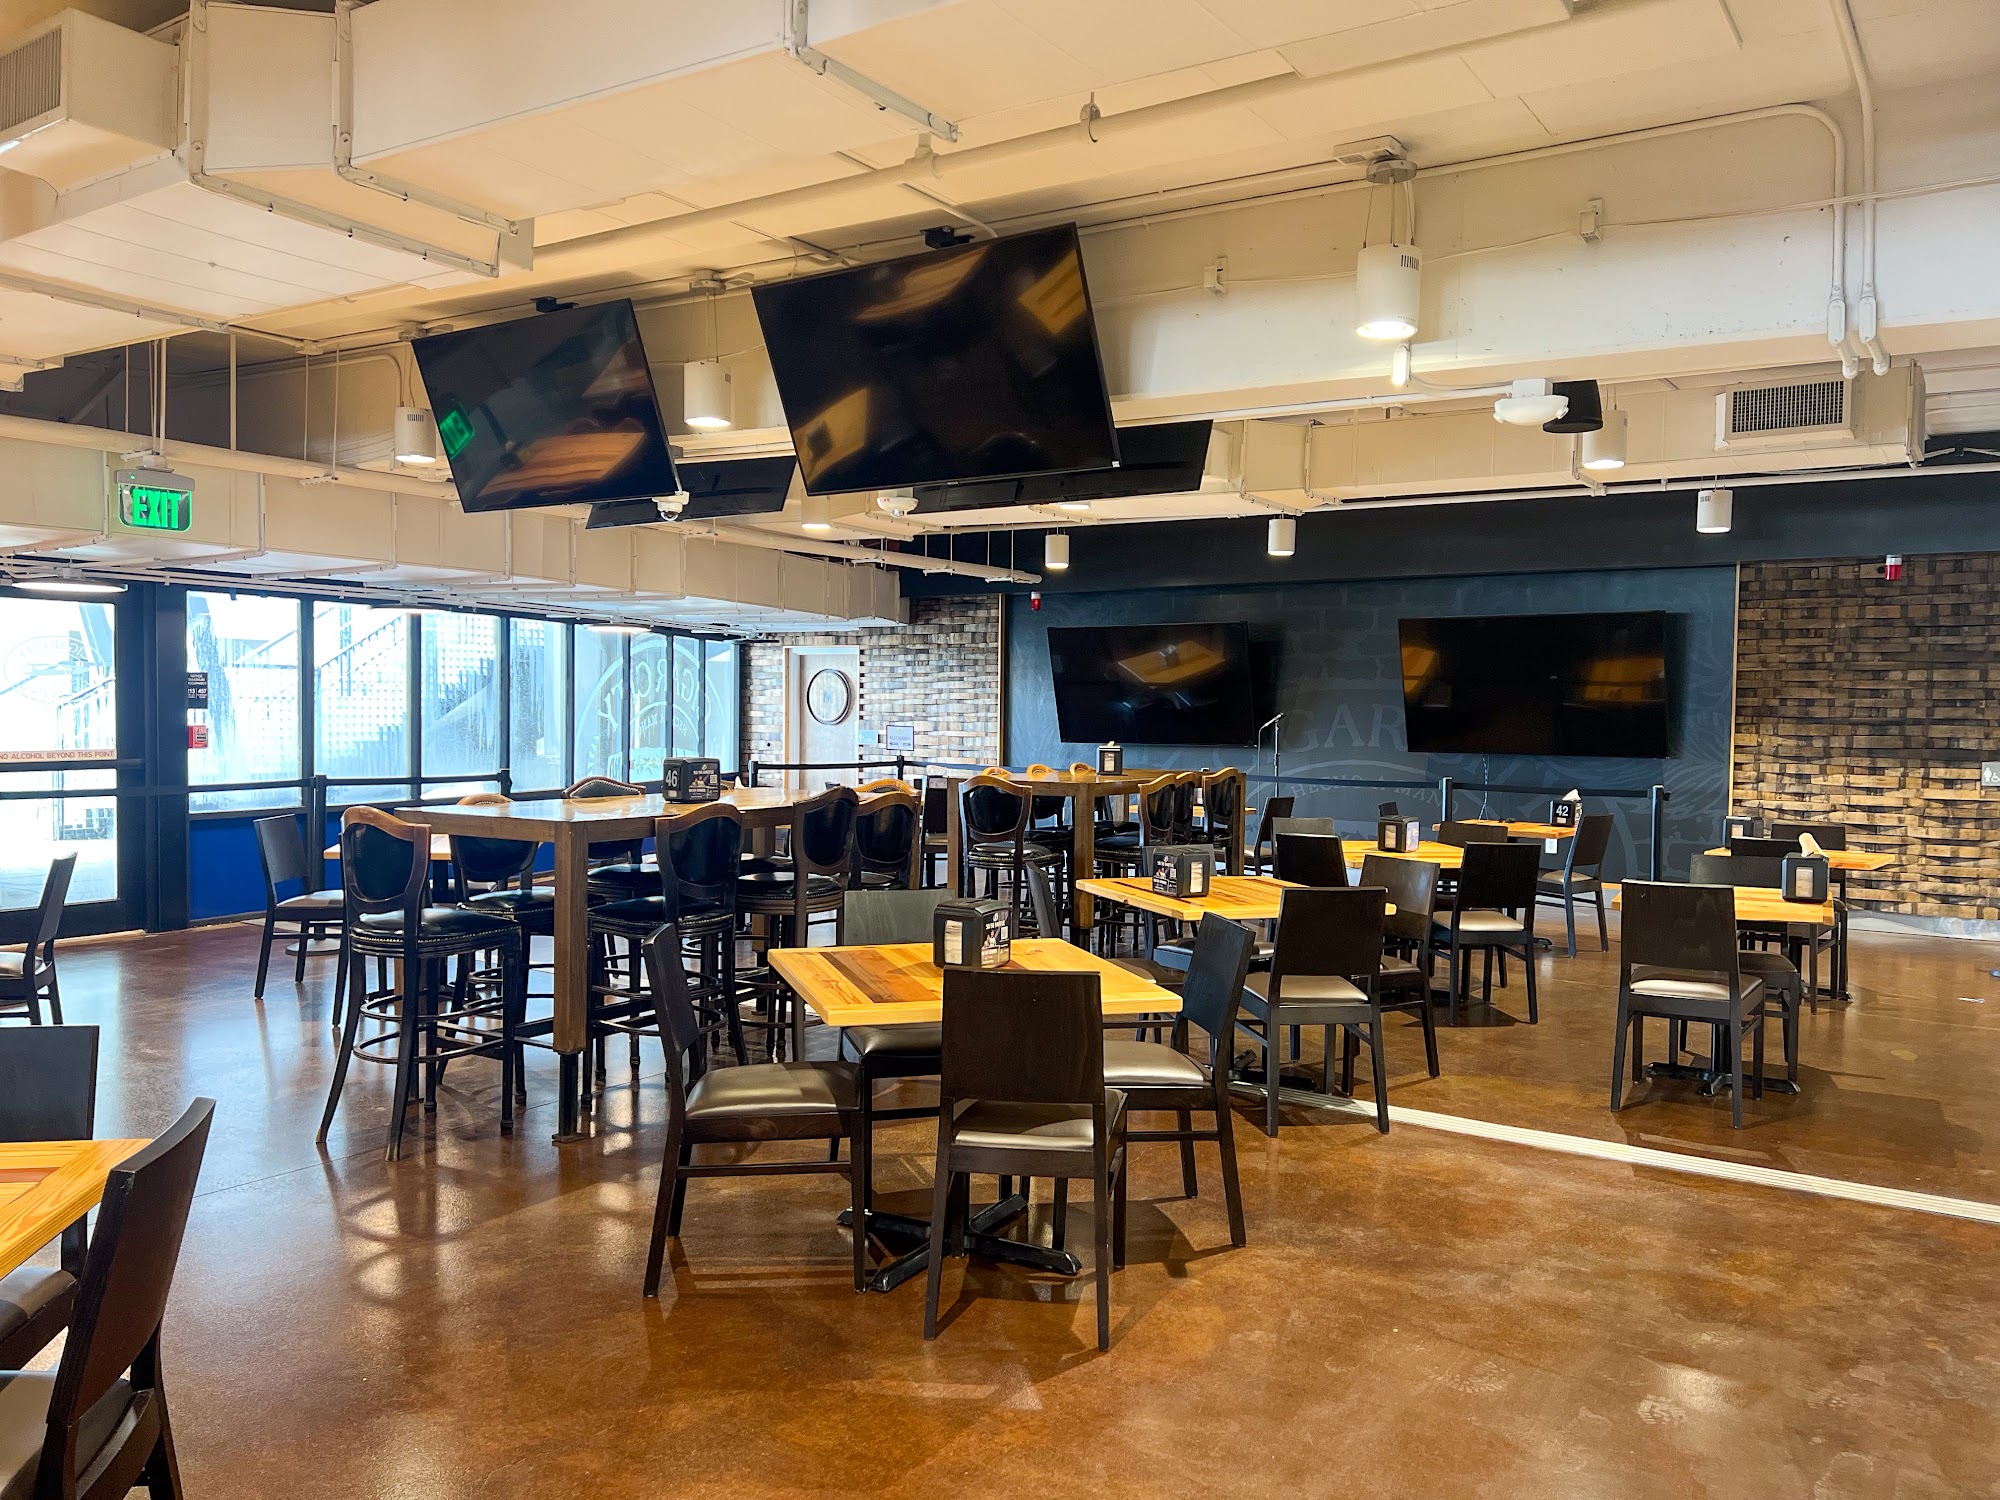 Cigar City Brewing Taproom Downtown at AMALIE Arena